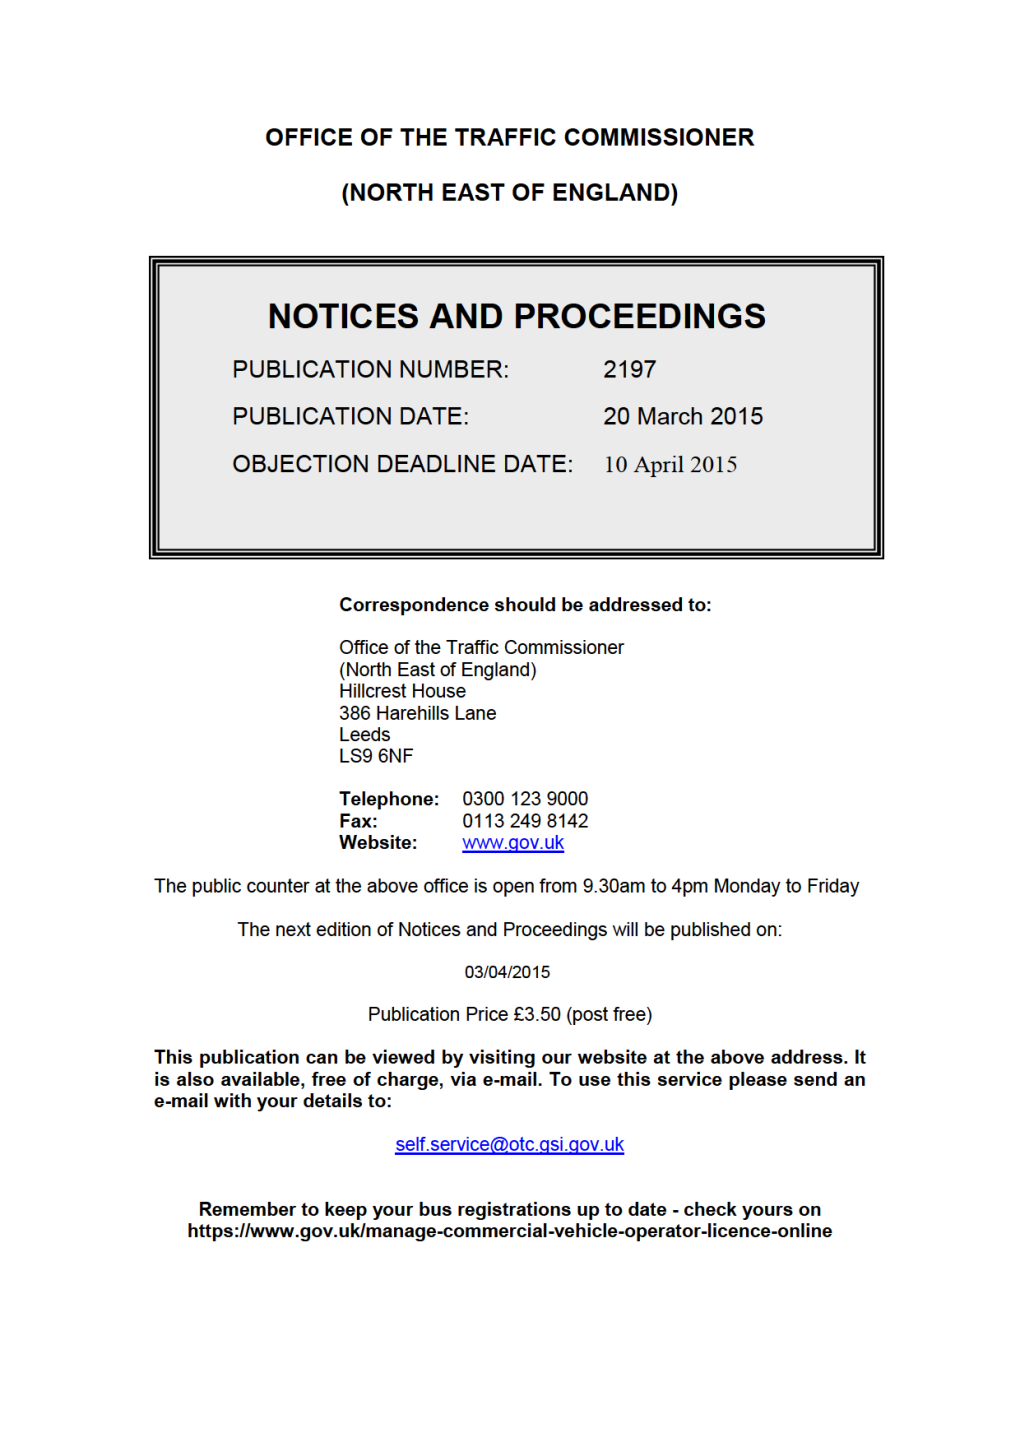 NOTICES and PROCEEDINGS 20 March 2015